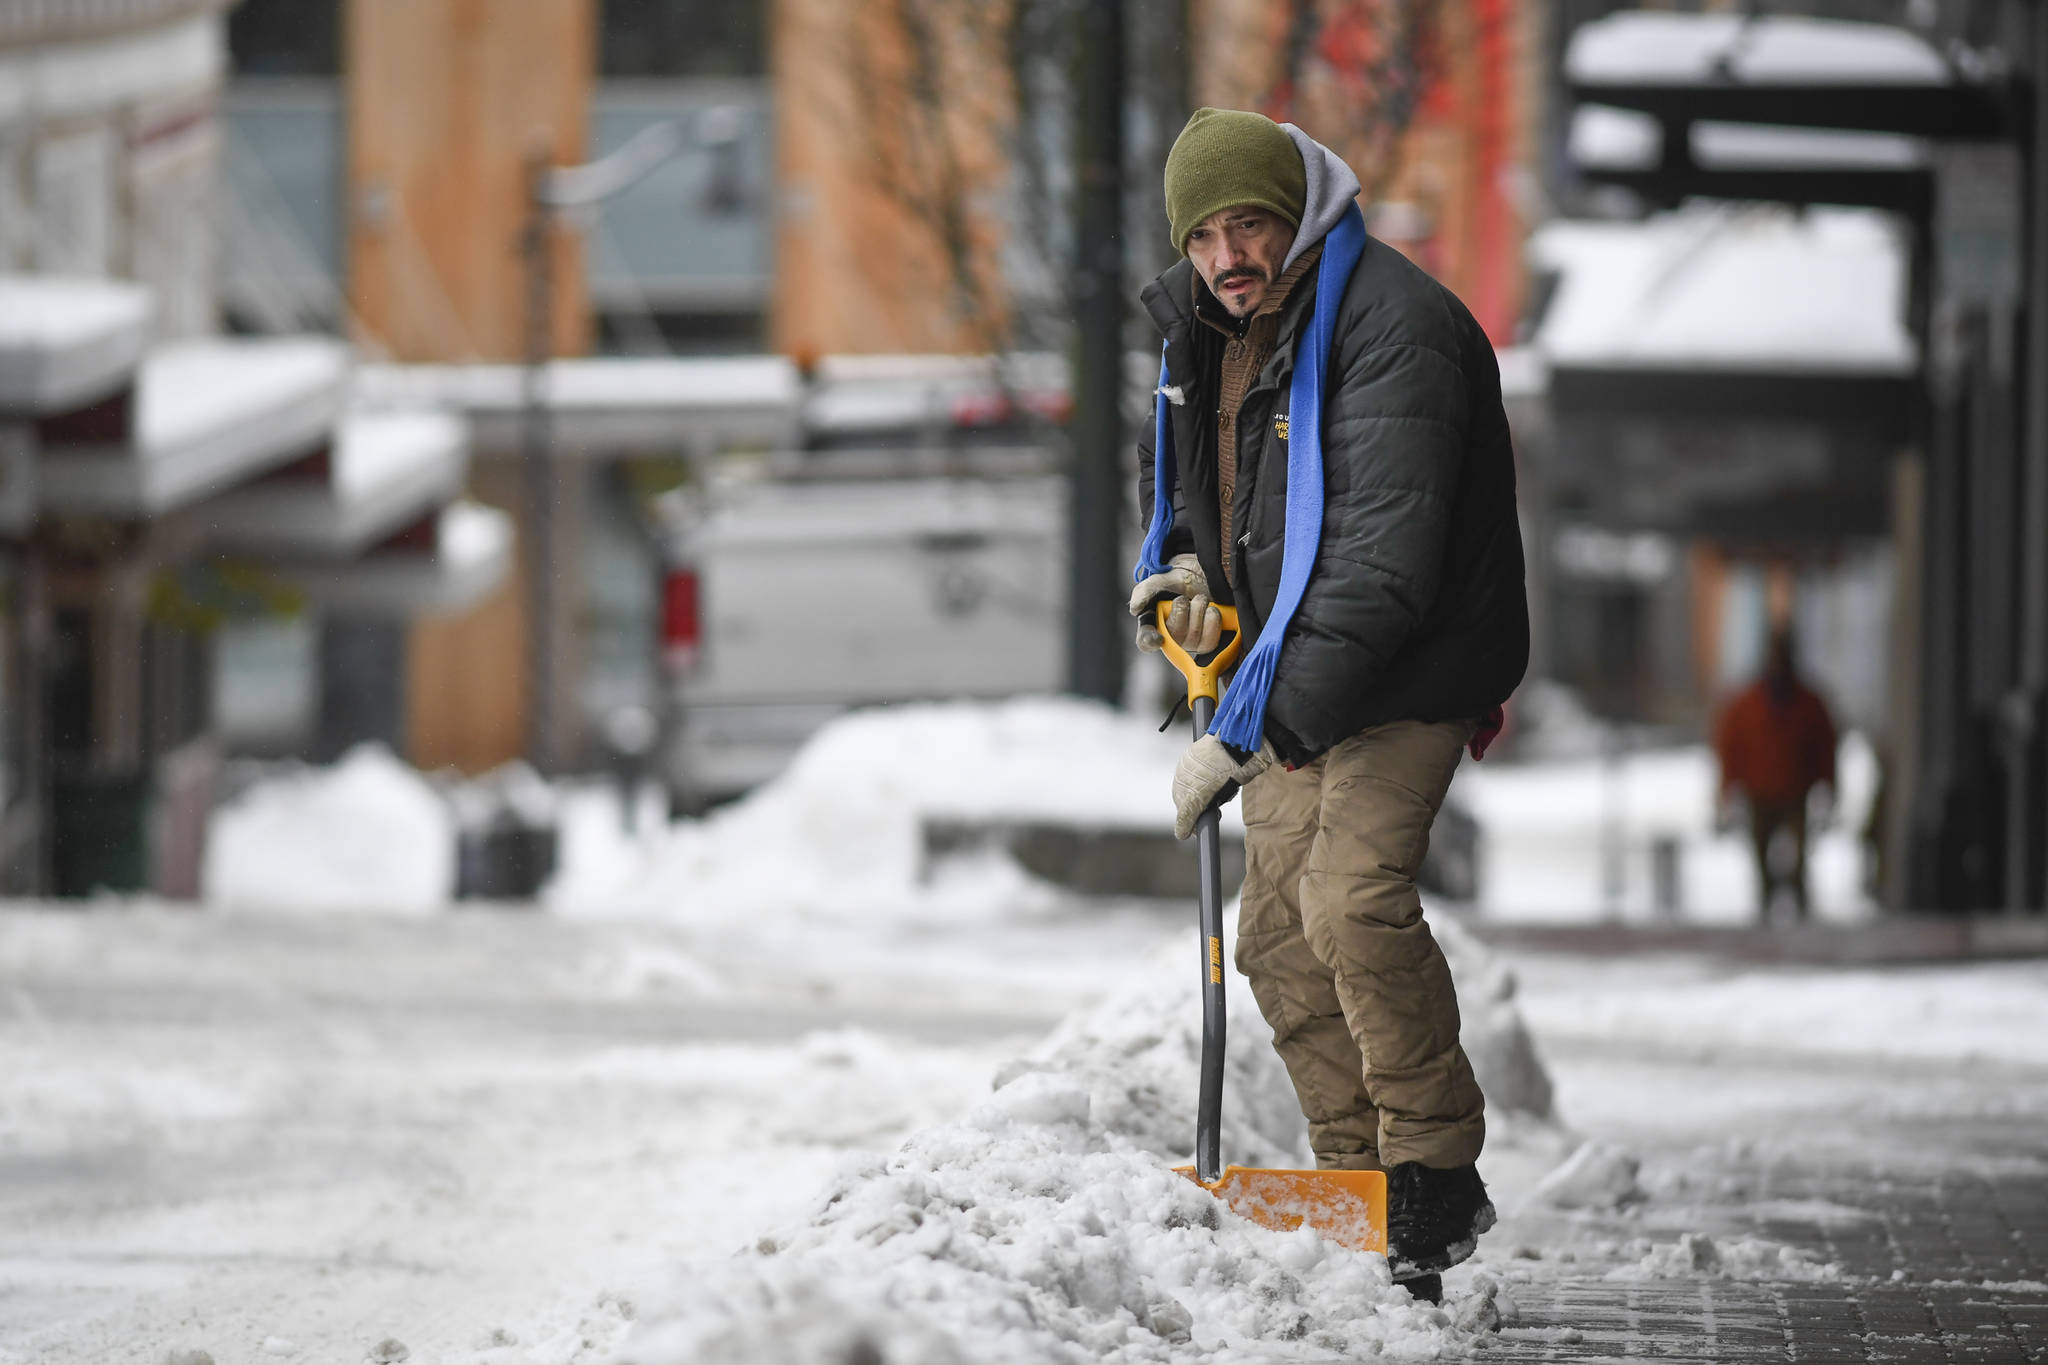 Fate Wilson shovels the sidewalk along Seward Street on Monday, Feb. 18, 2019. The National Weather Service forecasts numerous snow and rain showers for Tuesday with a high temperature in the mid 30s. (Michael Penn | Juneau Empire)